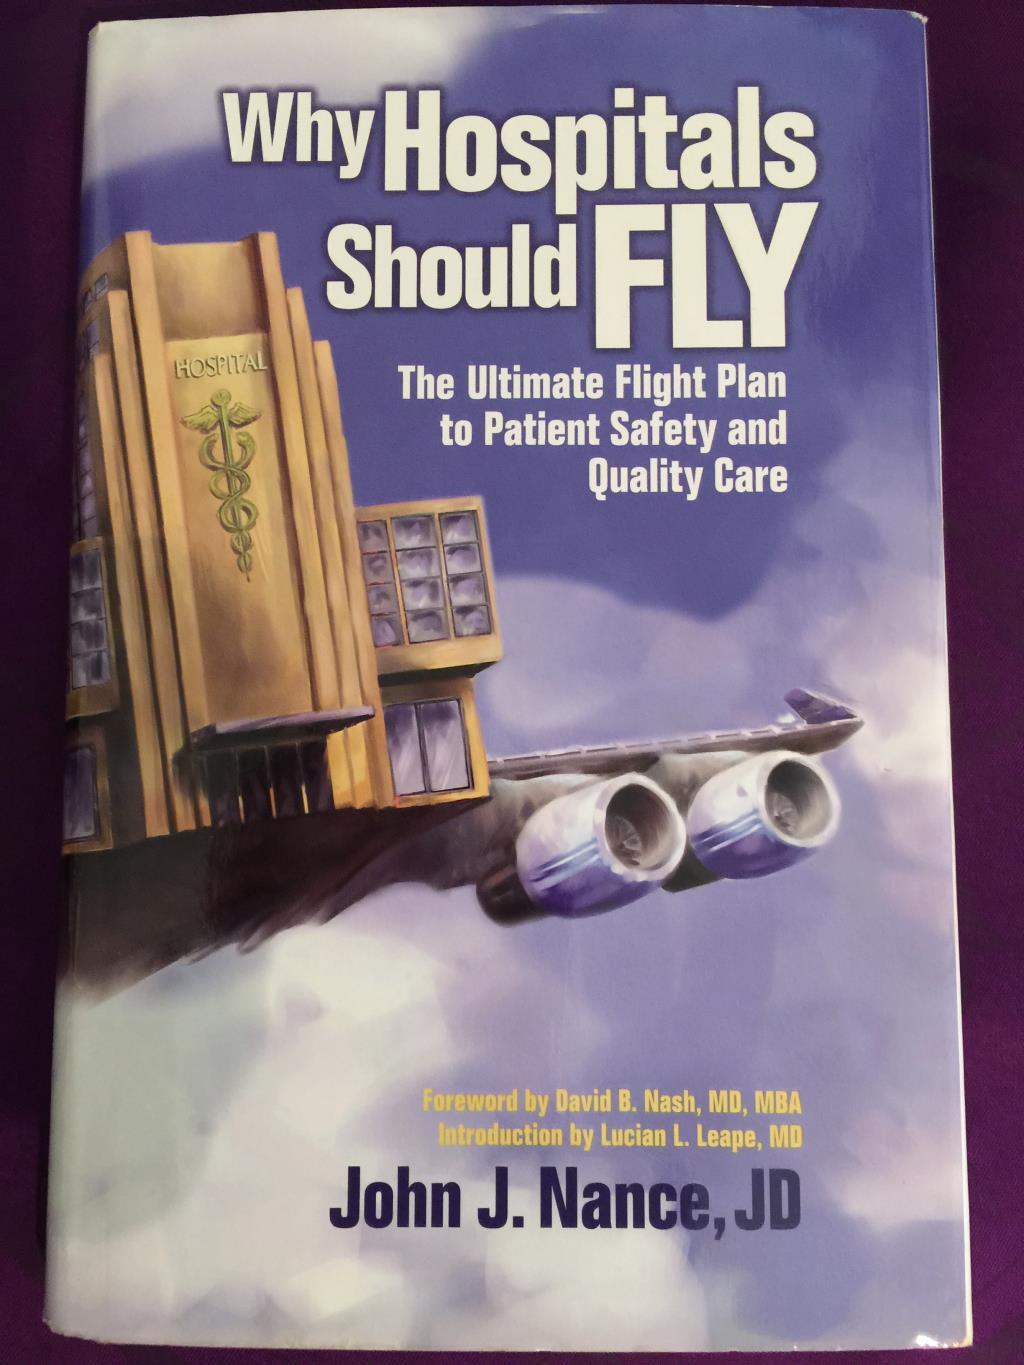 Why Hospital Should Fly: The Ultimate Flight Plan to Patient Safety